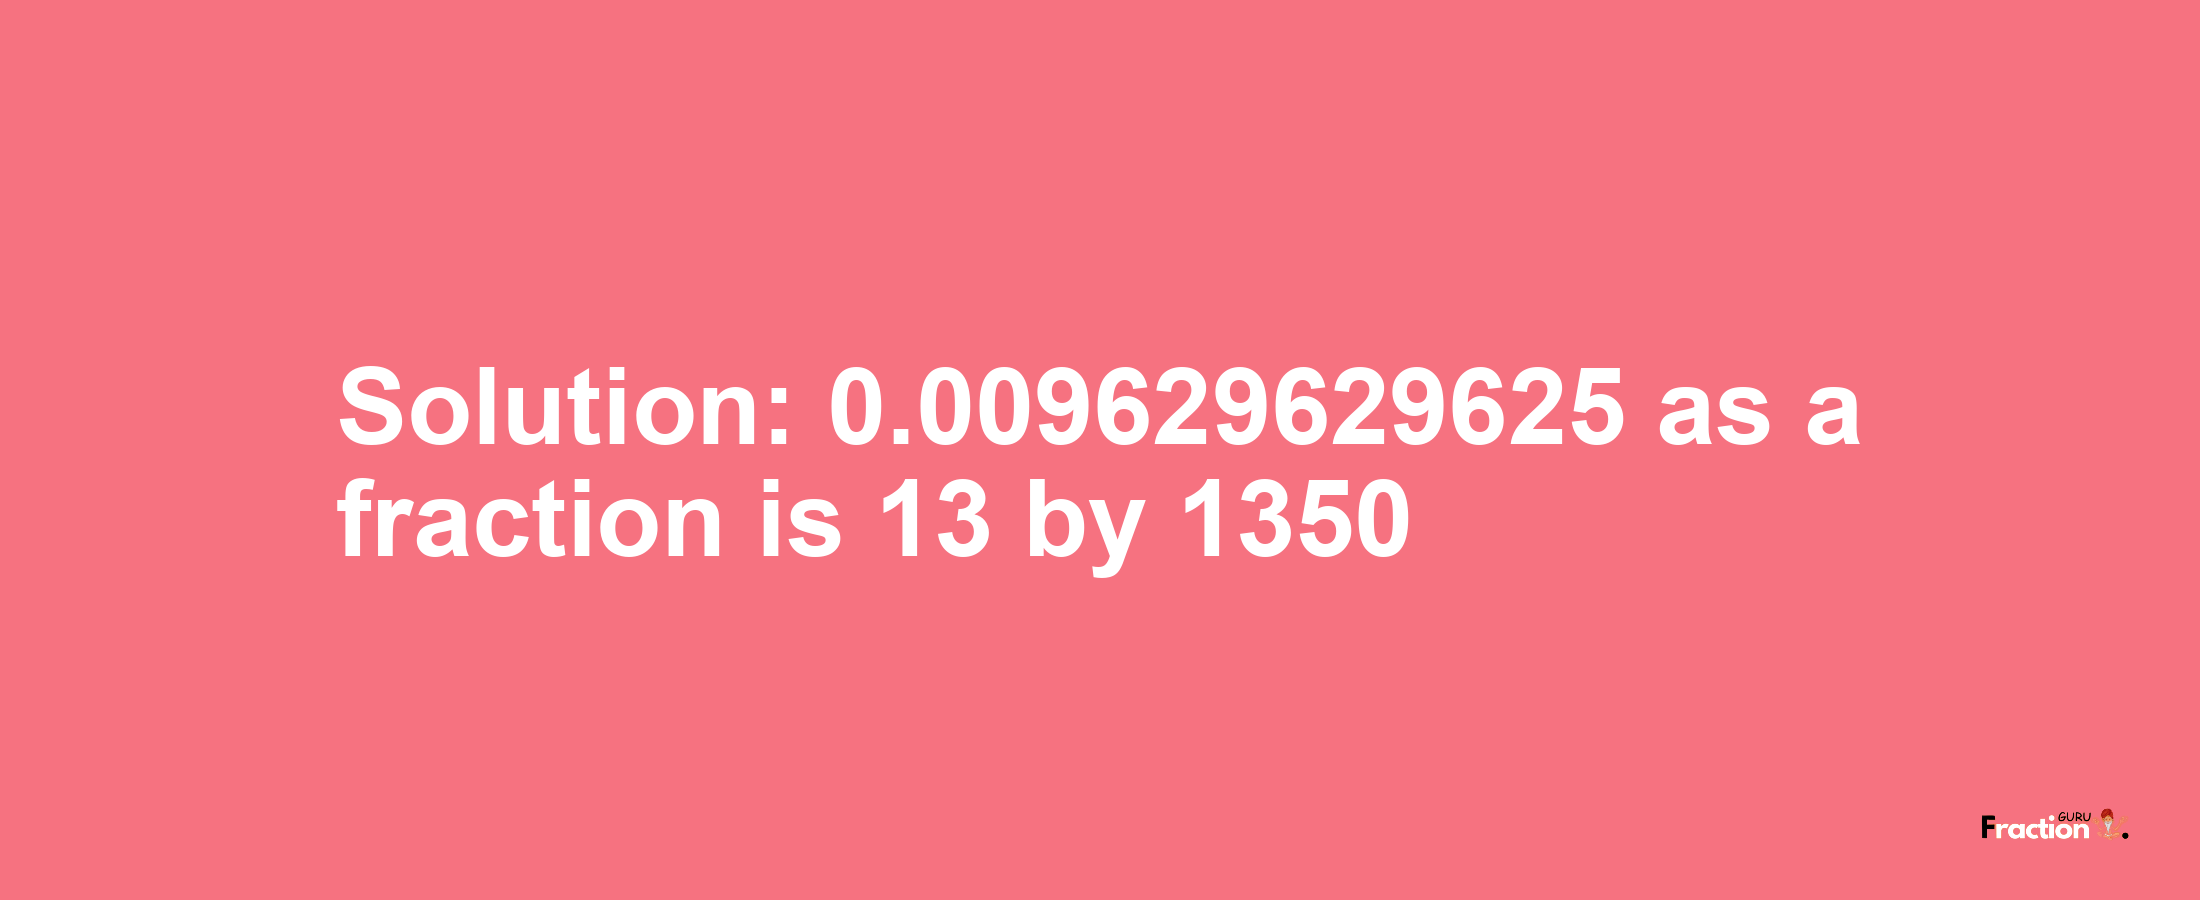 Solution:0.009629629625 as a fraction is 13/1350